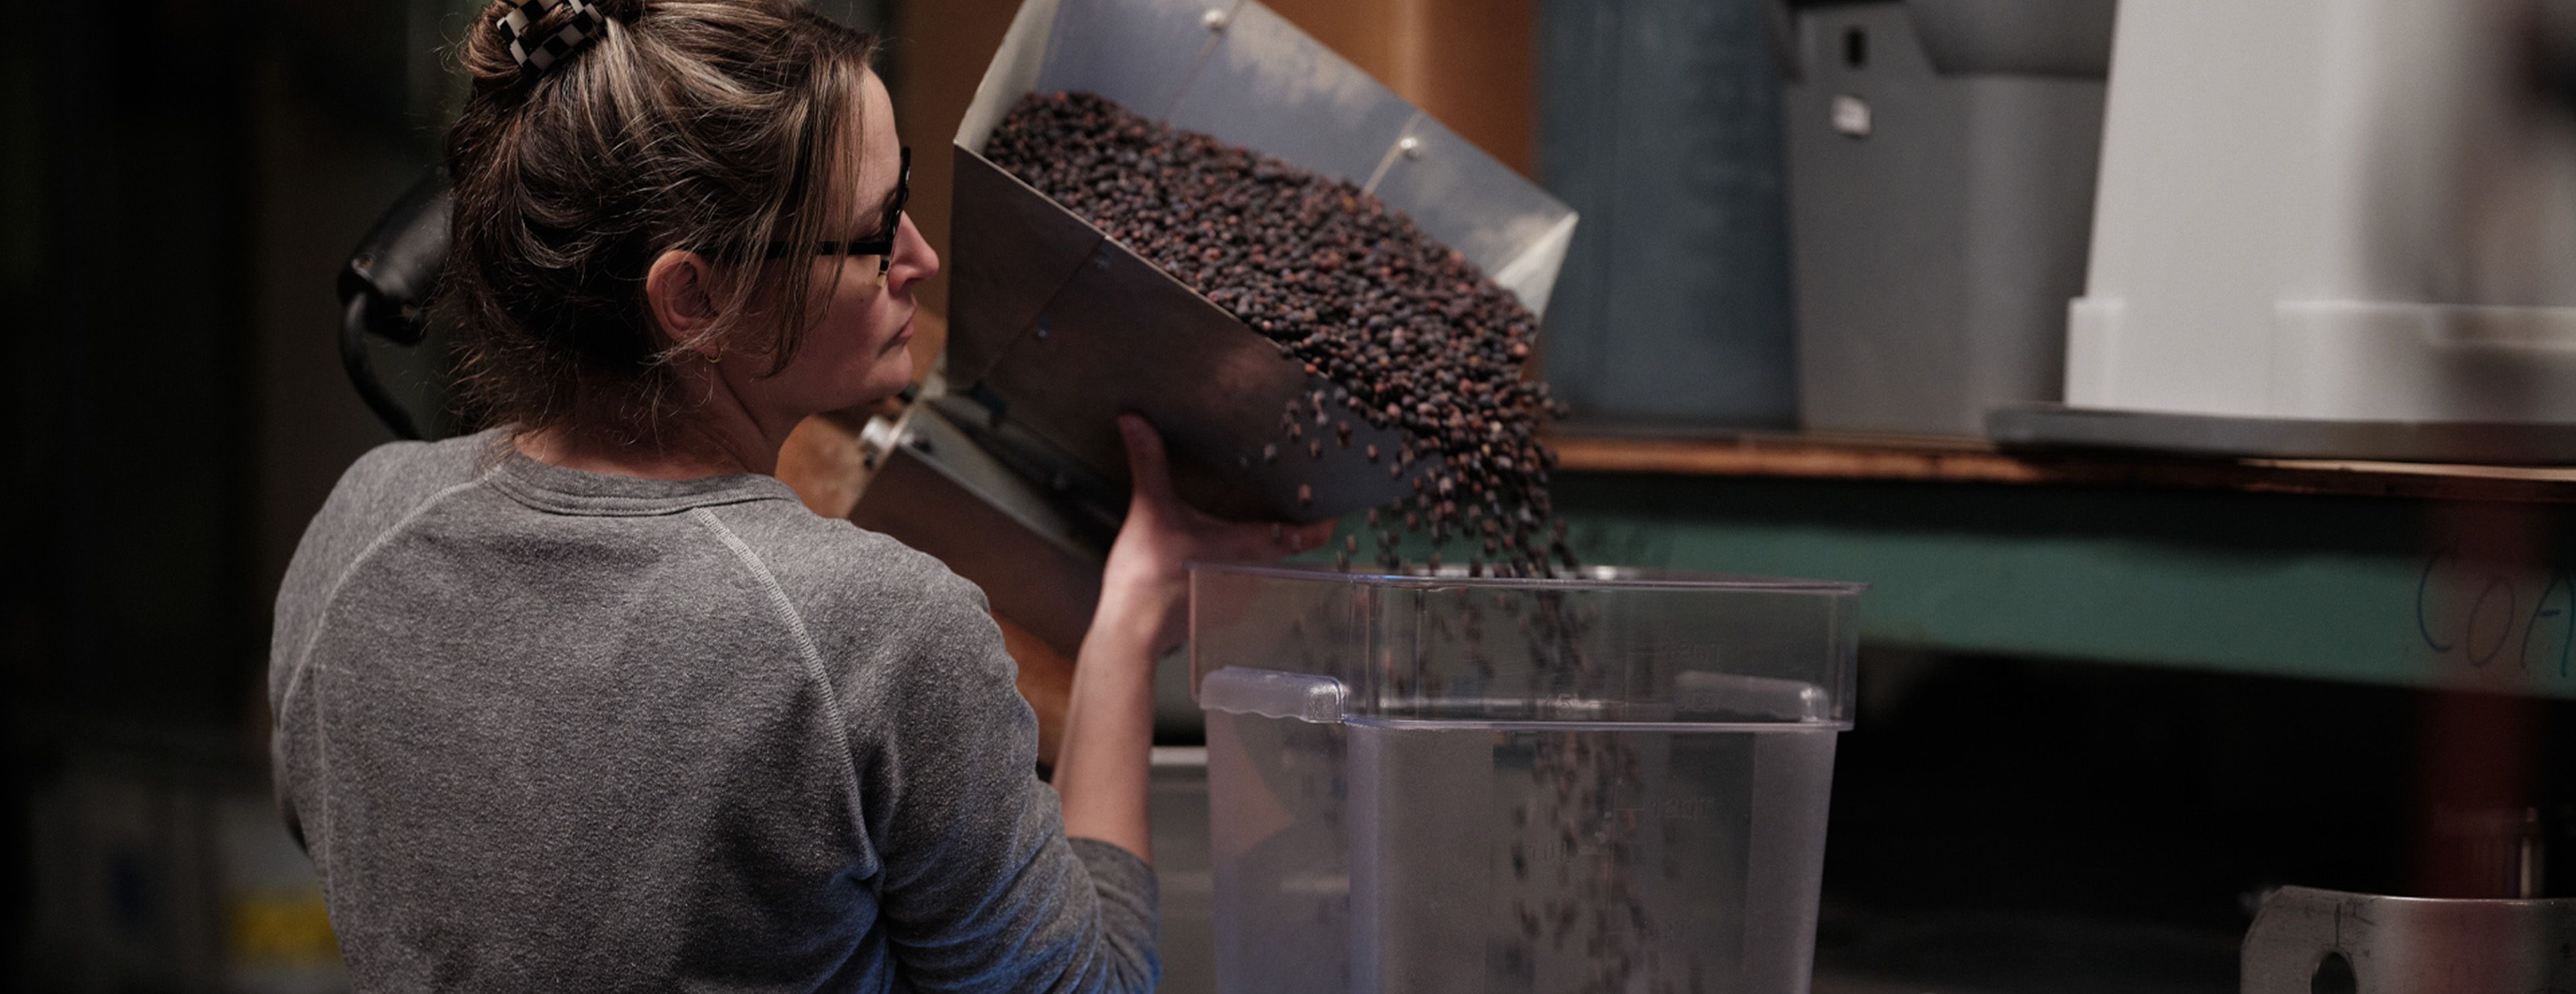 a woman pouring beans into a container